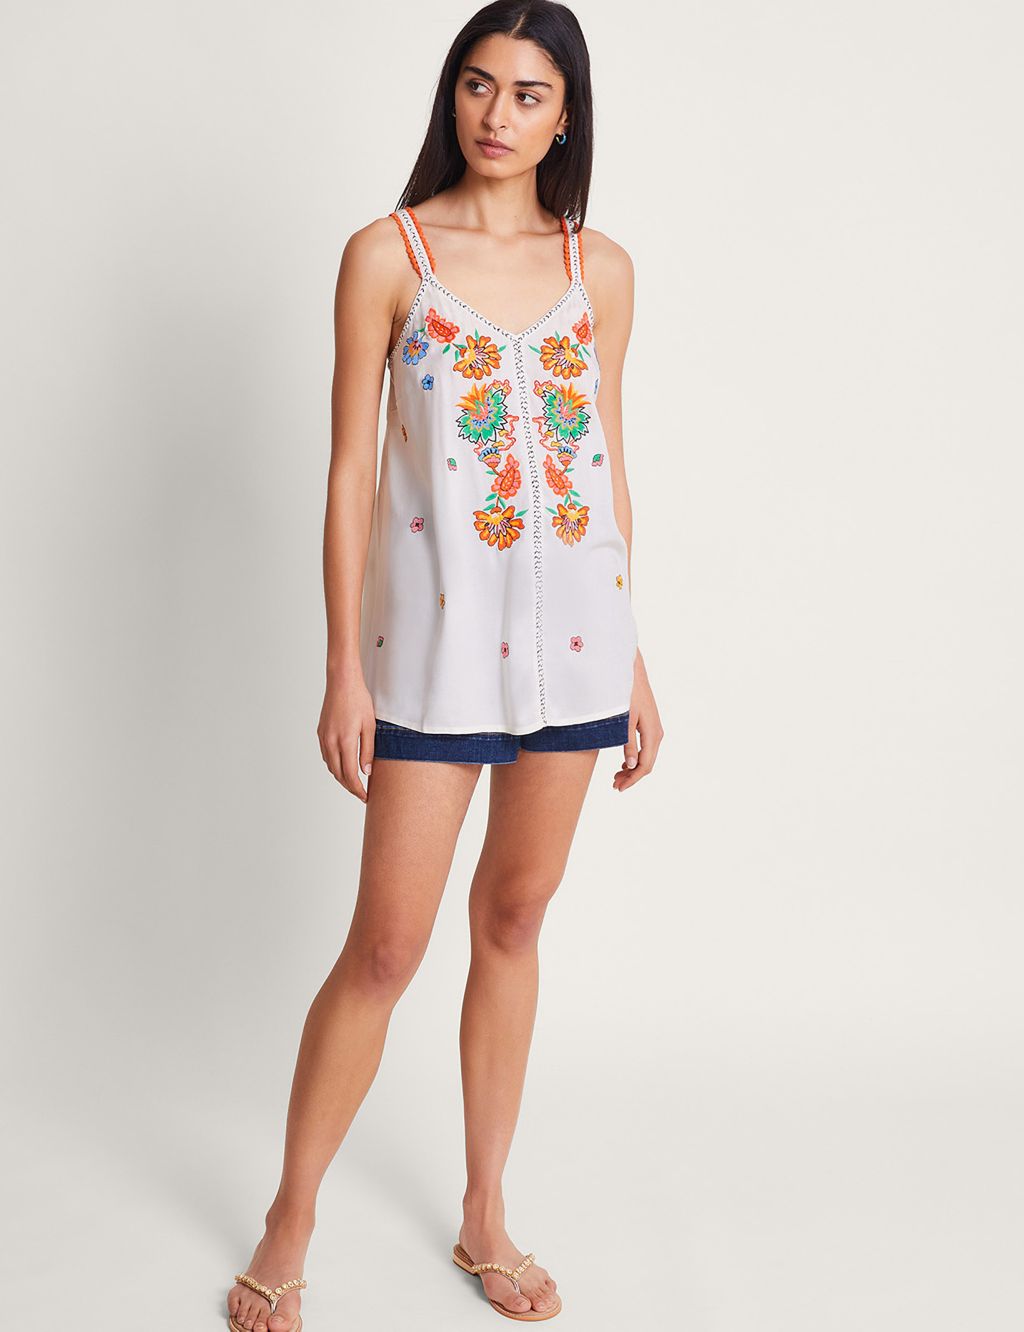 Floral Embroidered Cami Top image 4